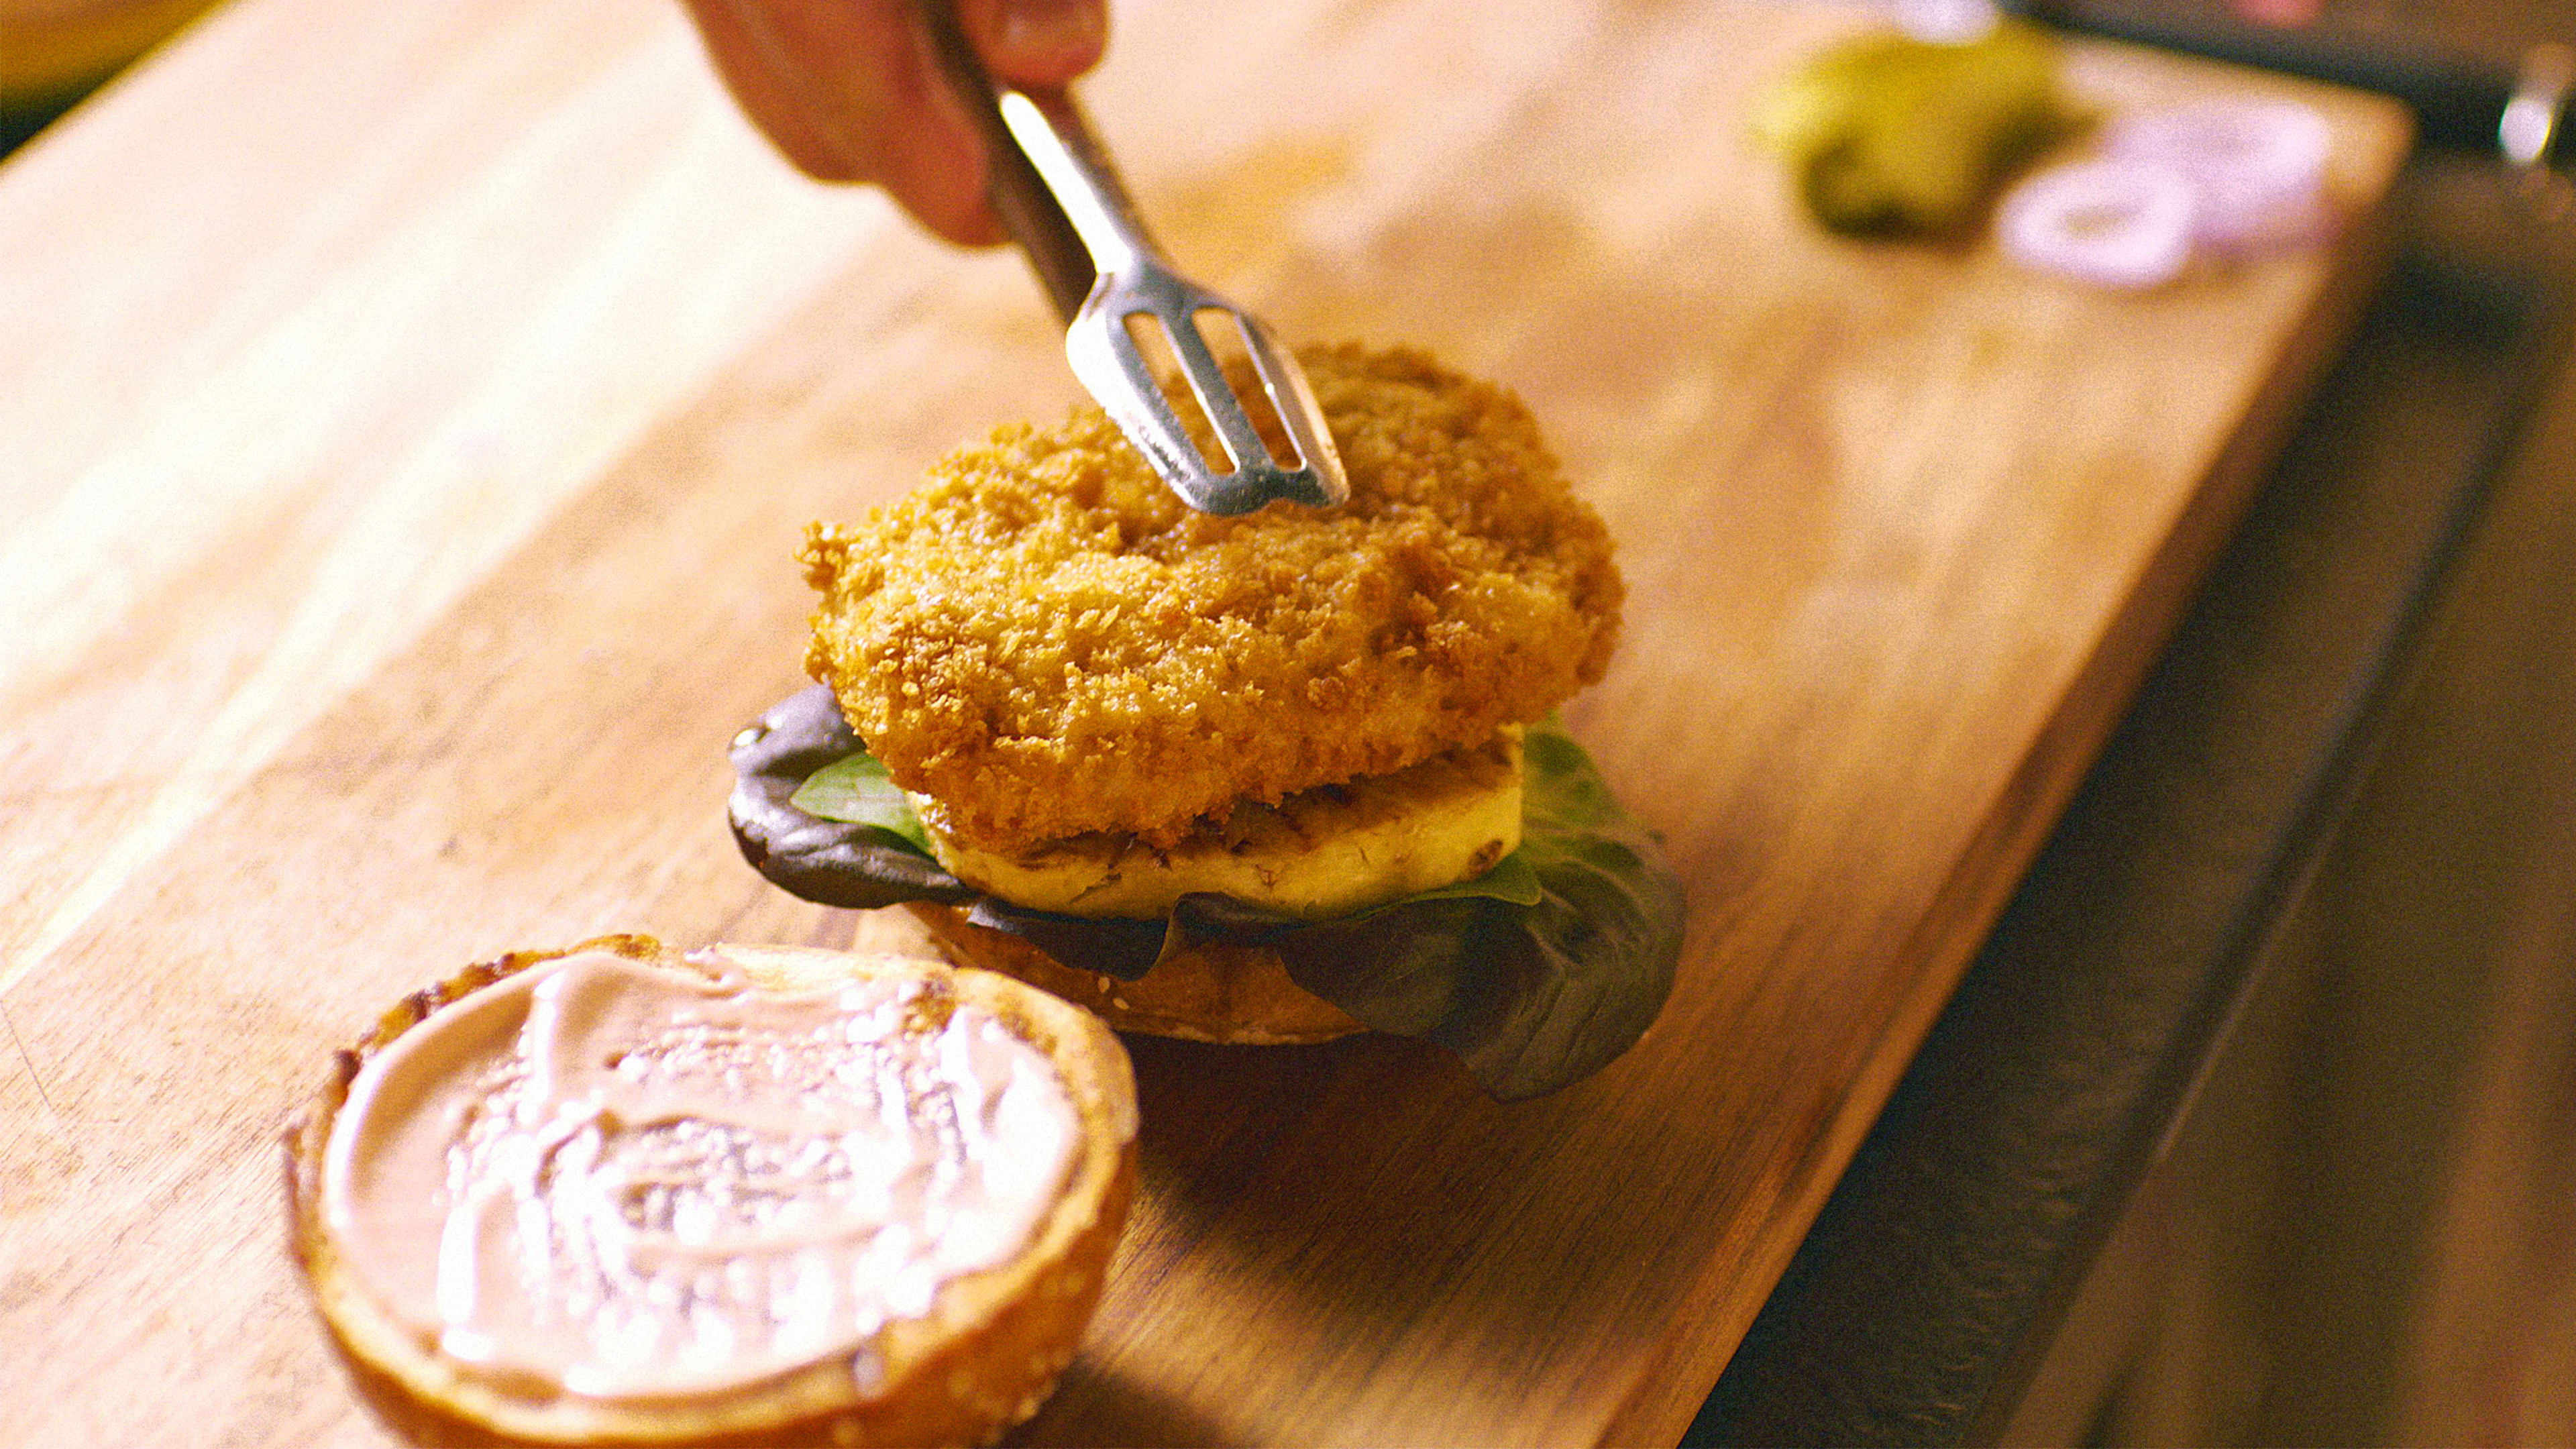 At the first lab-grown meat restaurant, you can eat a ‘cultured chicken’ sandwich